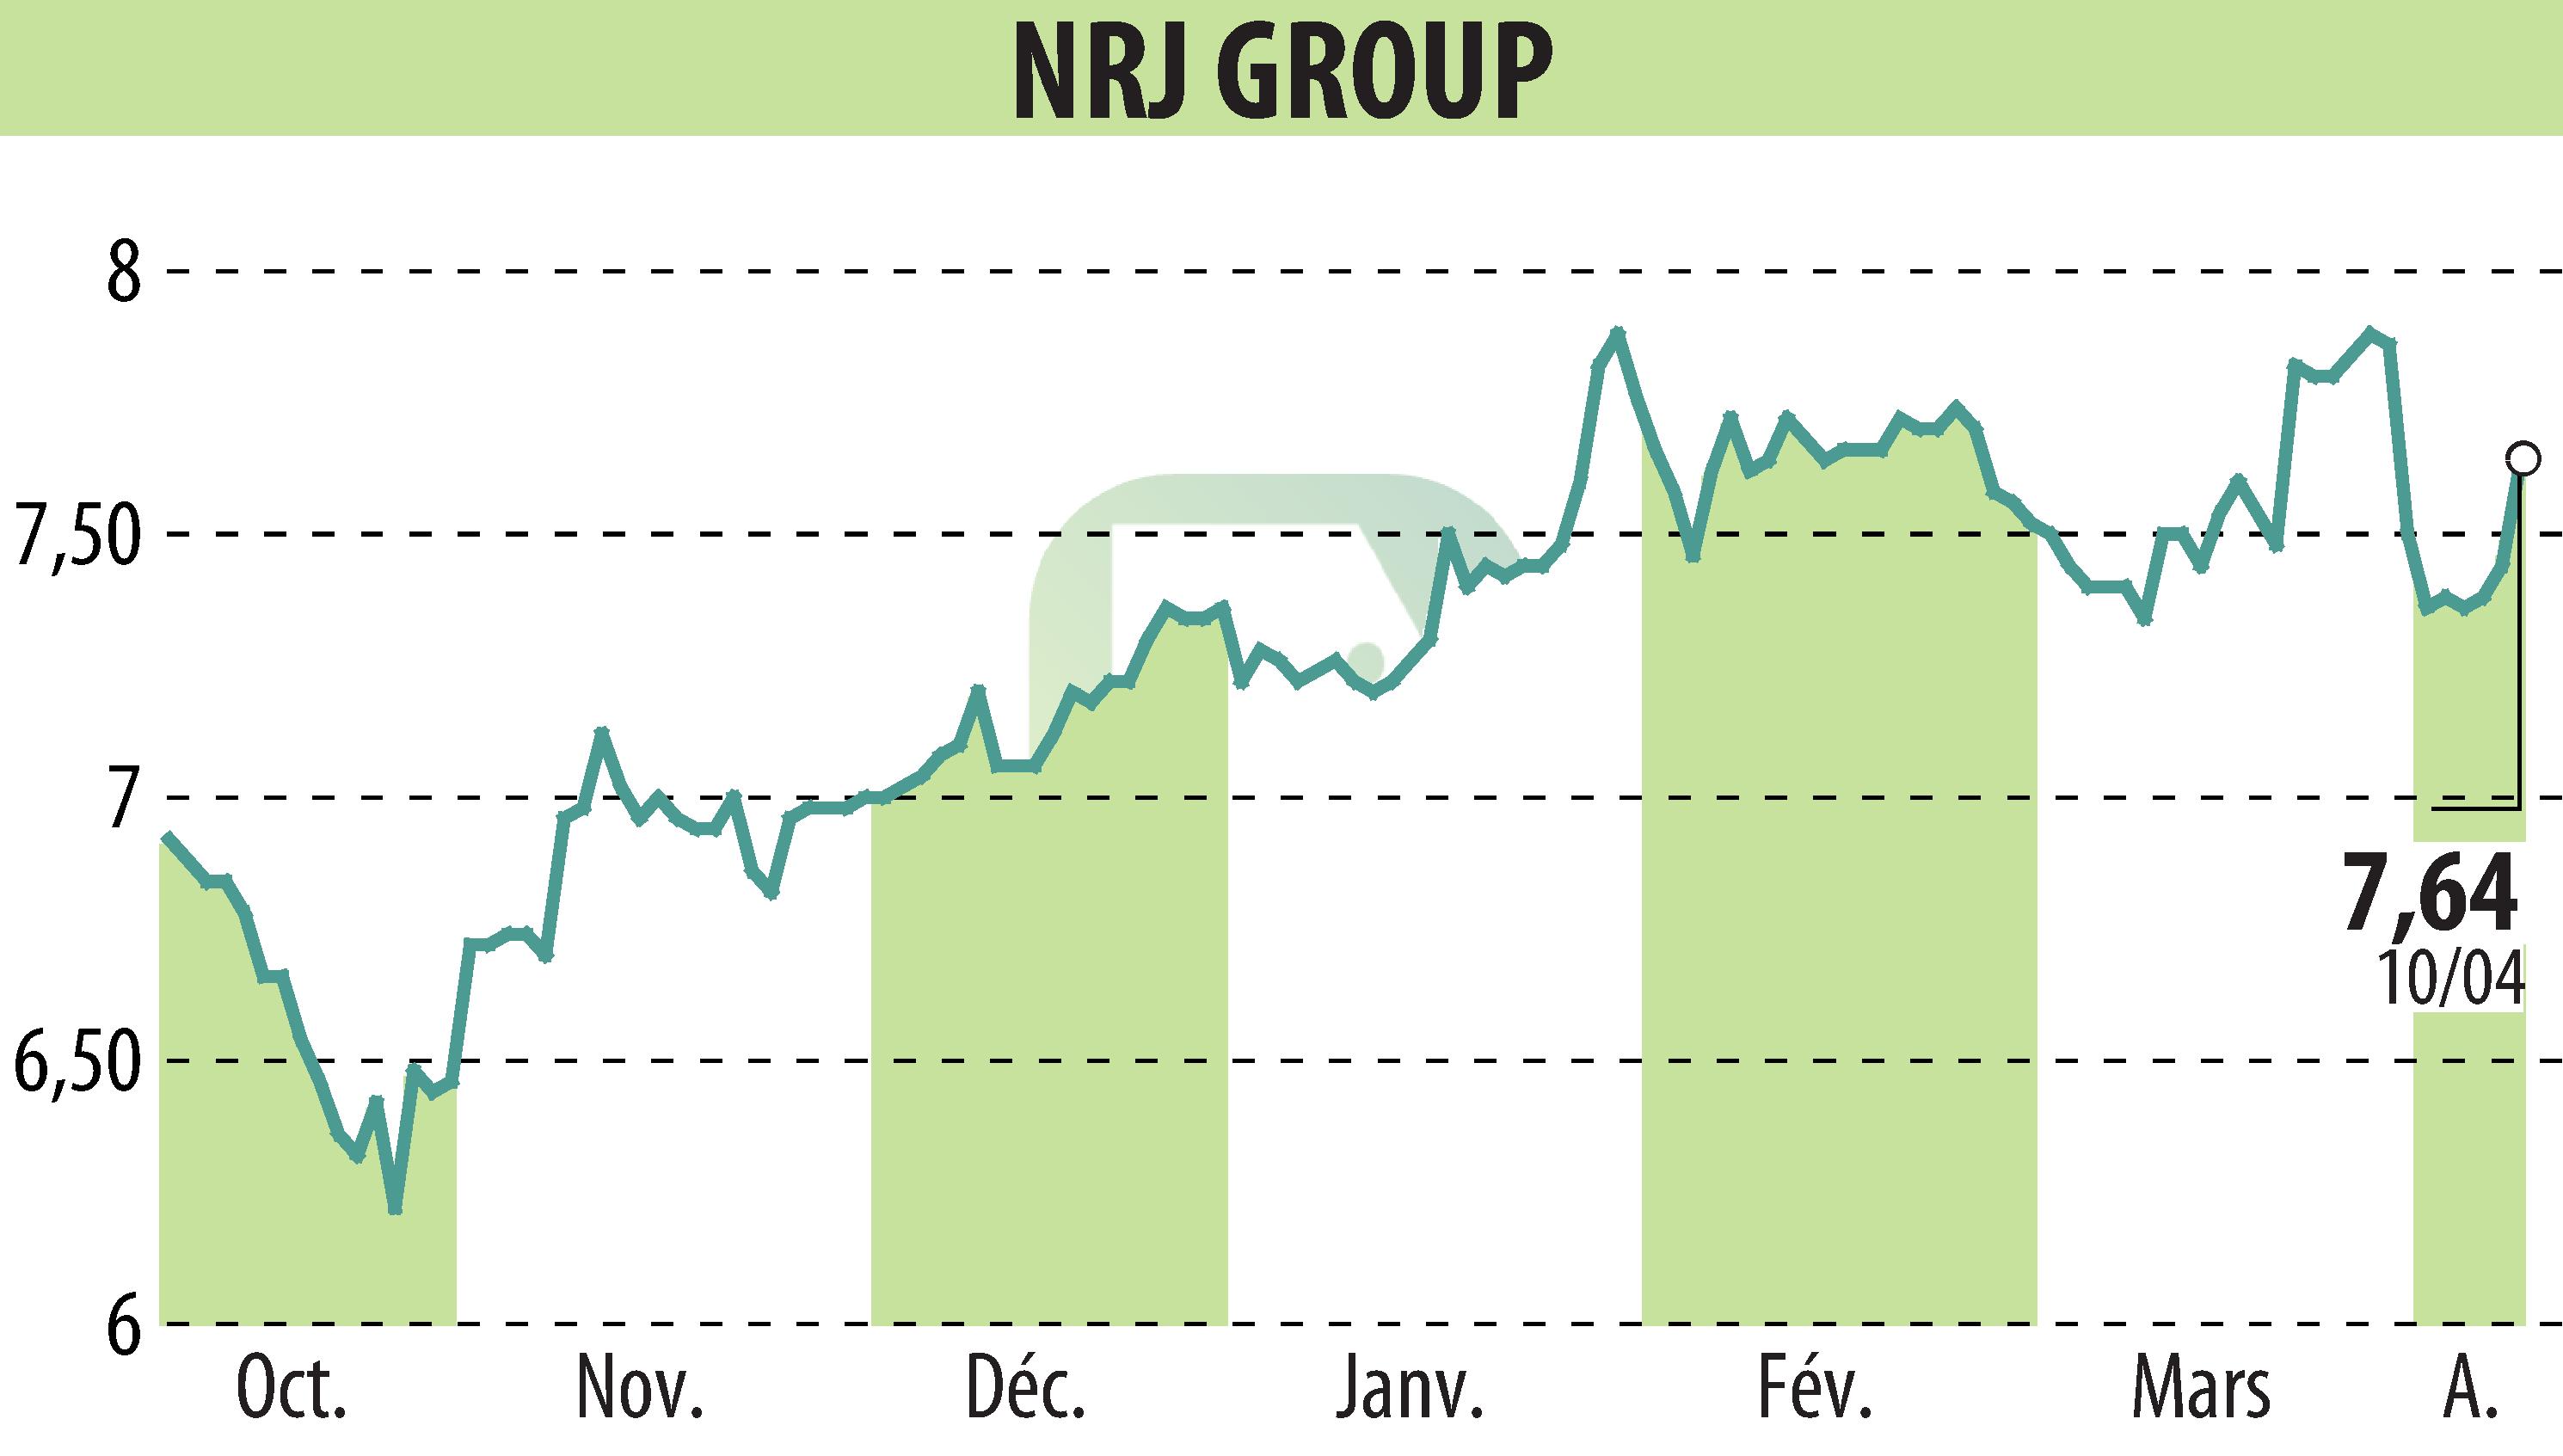 Stock price chart of NRJ GROUP (EPA:NRG) showing fluctuations.